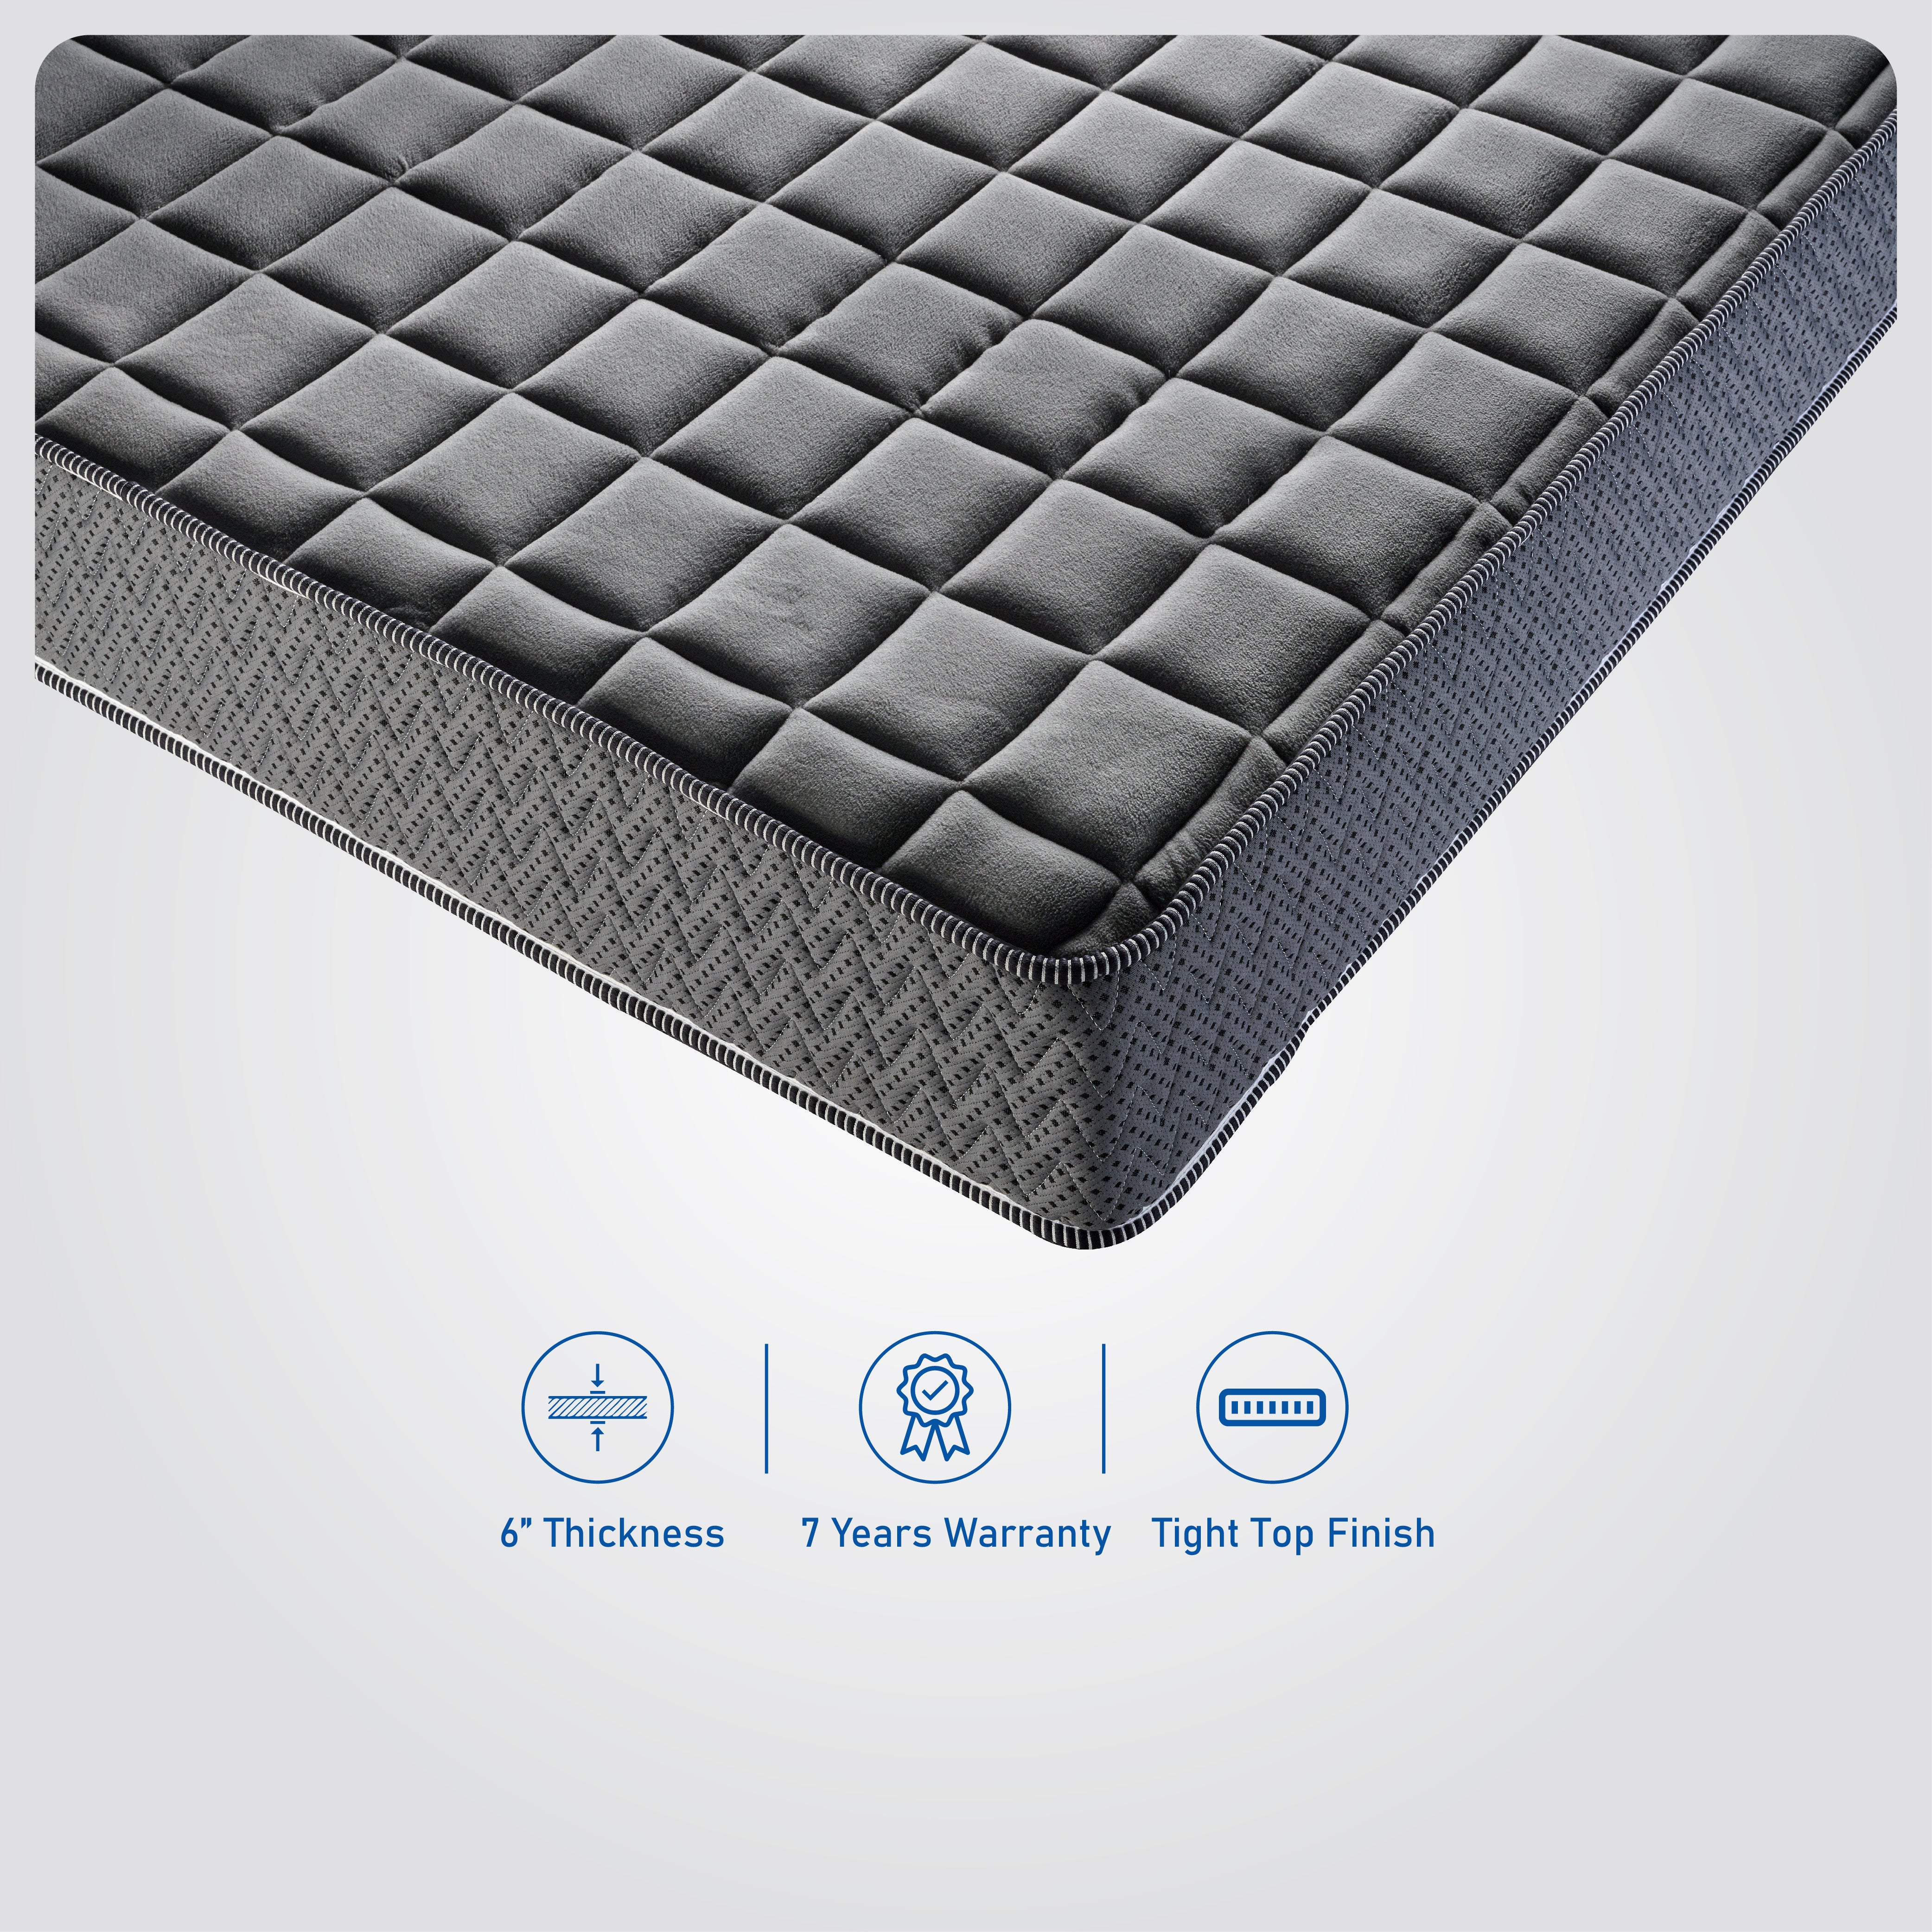 Buy Orthopedic Spinal Support High Density Foam Mattress In India